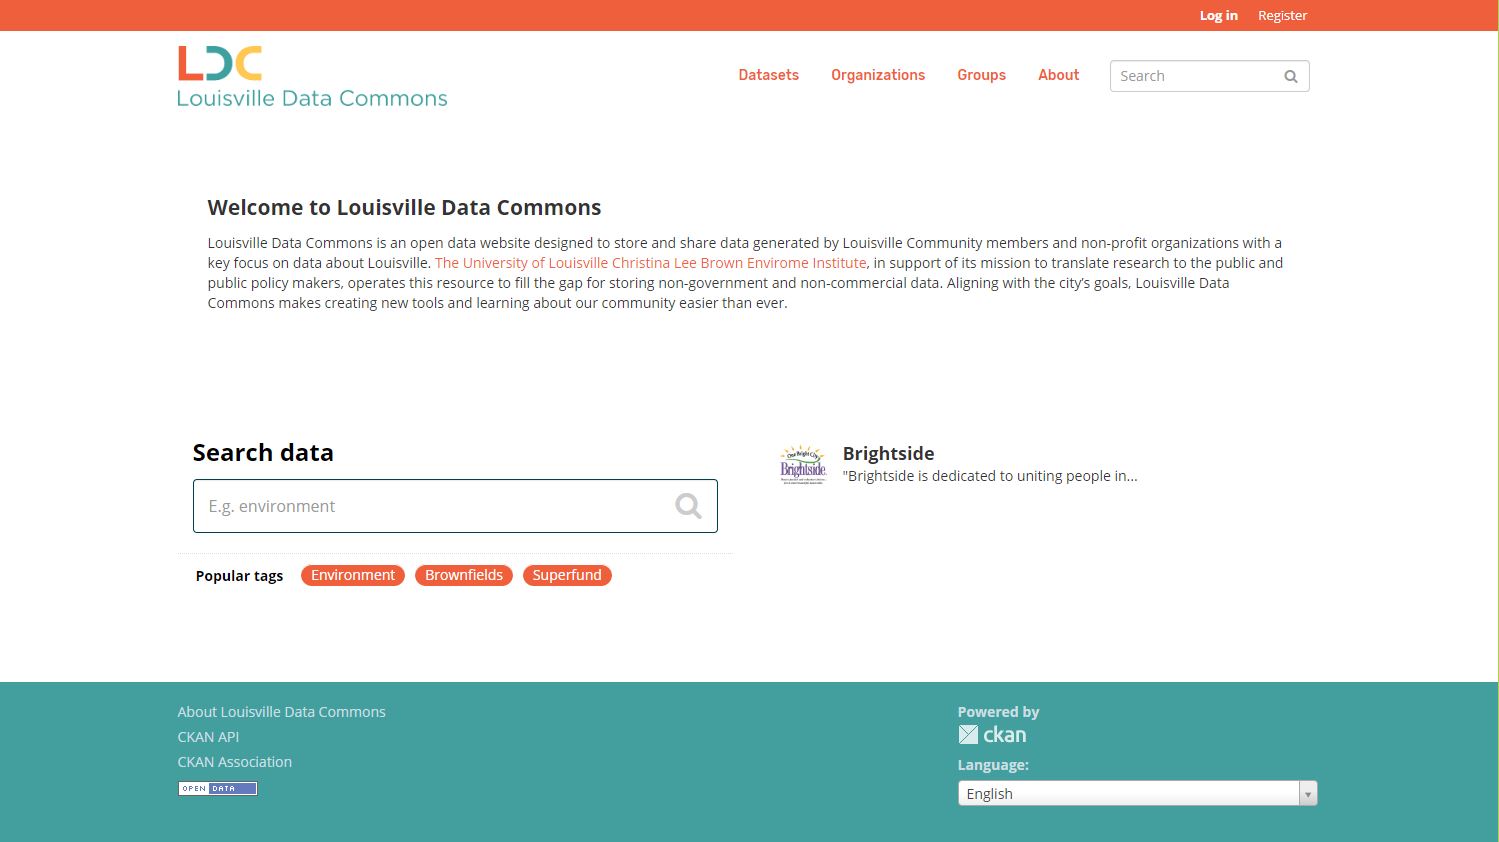 LouisvilleDataCommons.org home page